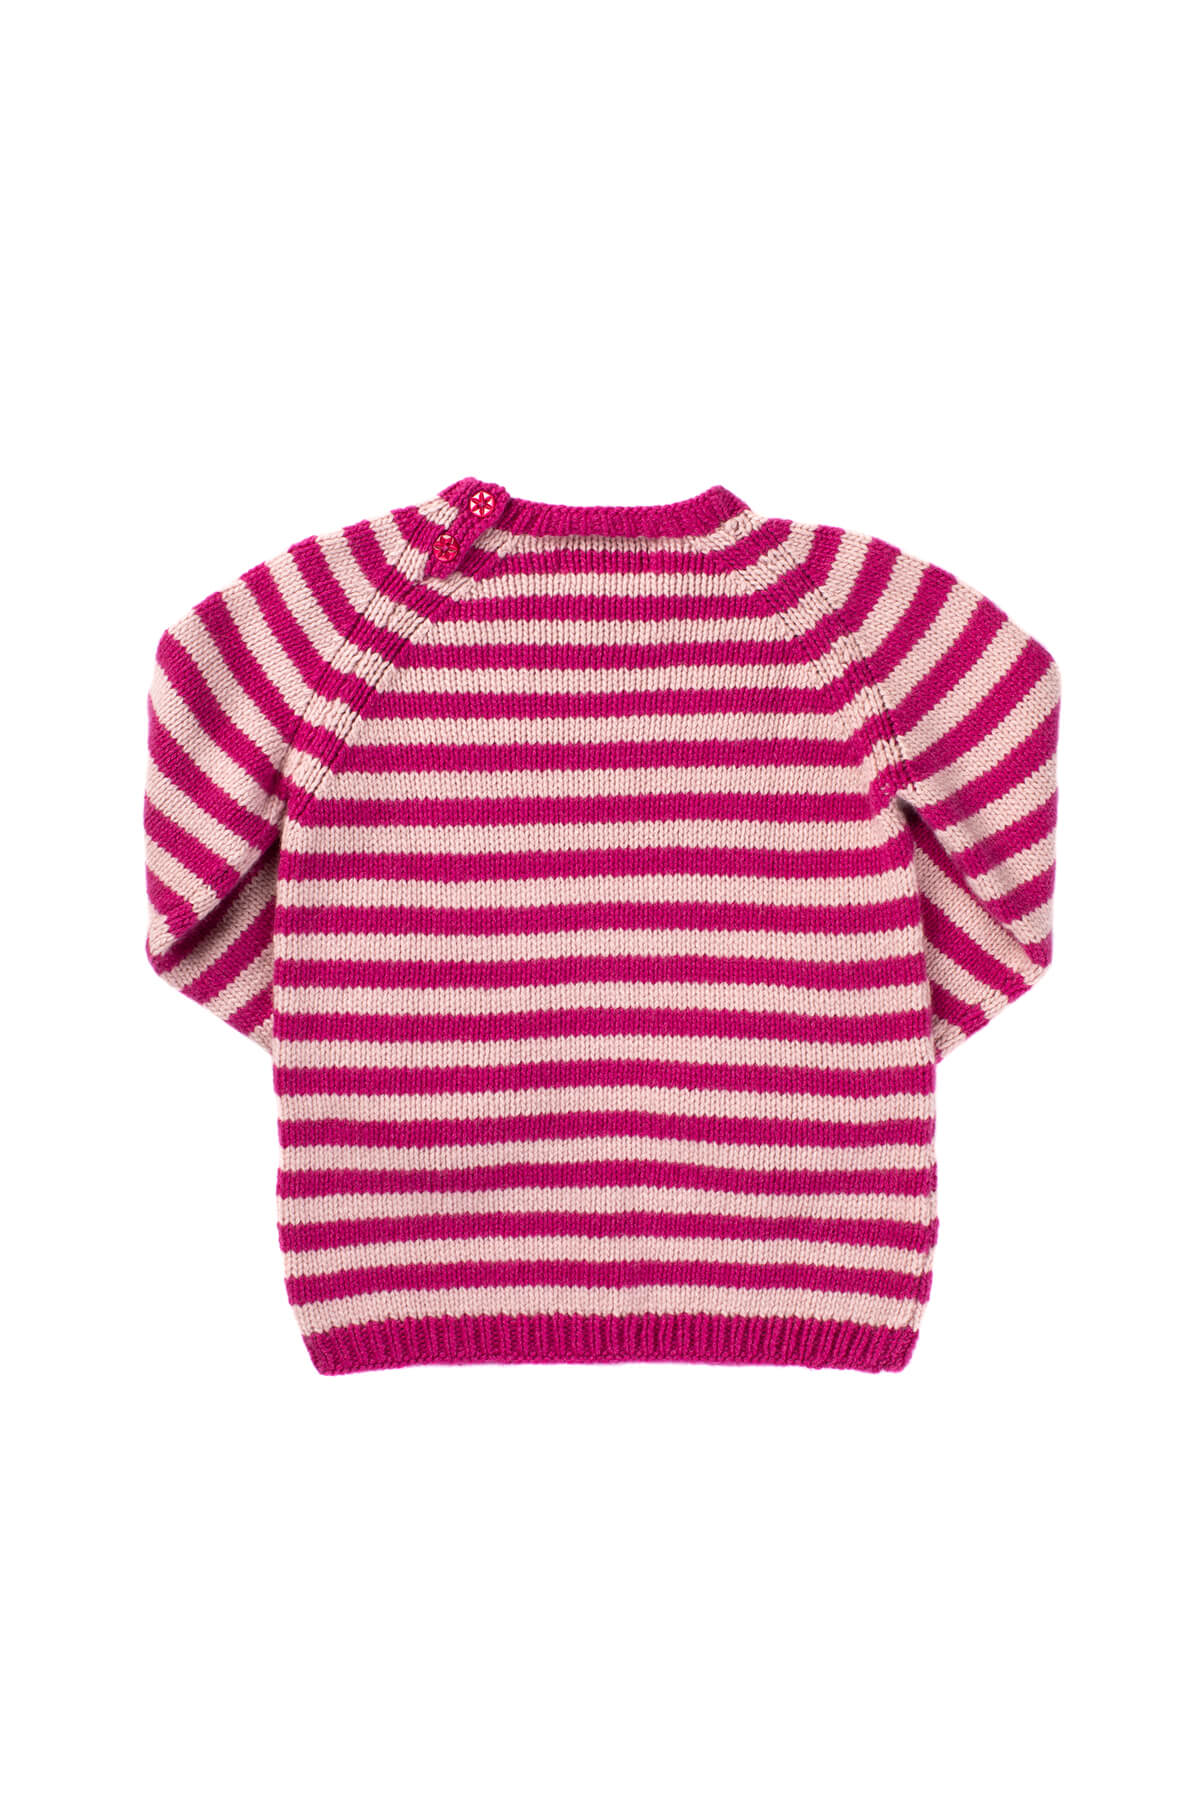 Back of Johnstons of Elgin Stripy Hand Knitted Children's Cashmere Jumper in Fandango & Orchid on white background 76199ZZZ108